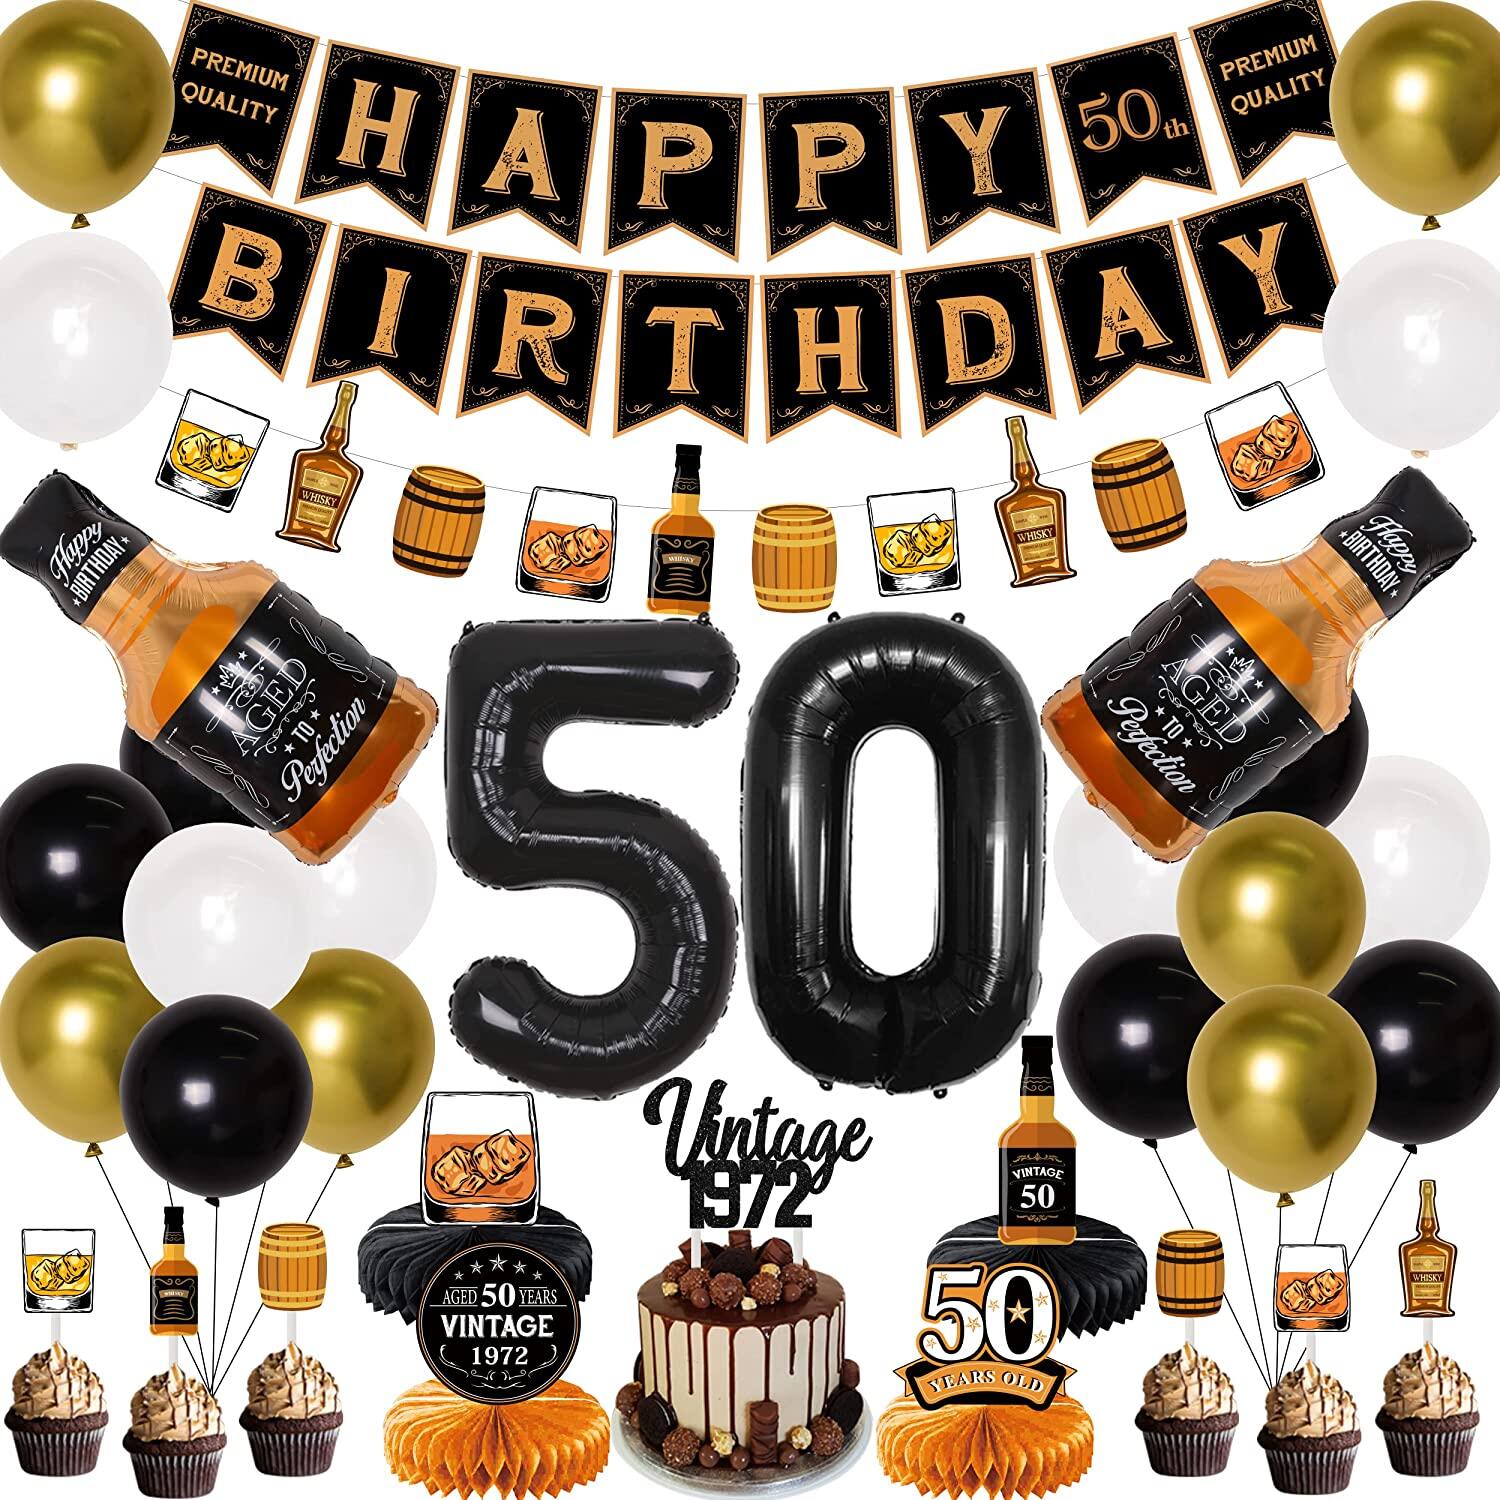 CHEEREVEAL Whiskey 30th 40th 50th 60th Birthday Decorations for Men Whiskey Happy Birthday Banner Garland Cake Topper Classic Vintage Theme Birthday Decorations Beer Balloons for Men